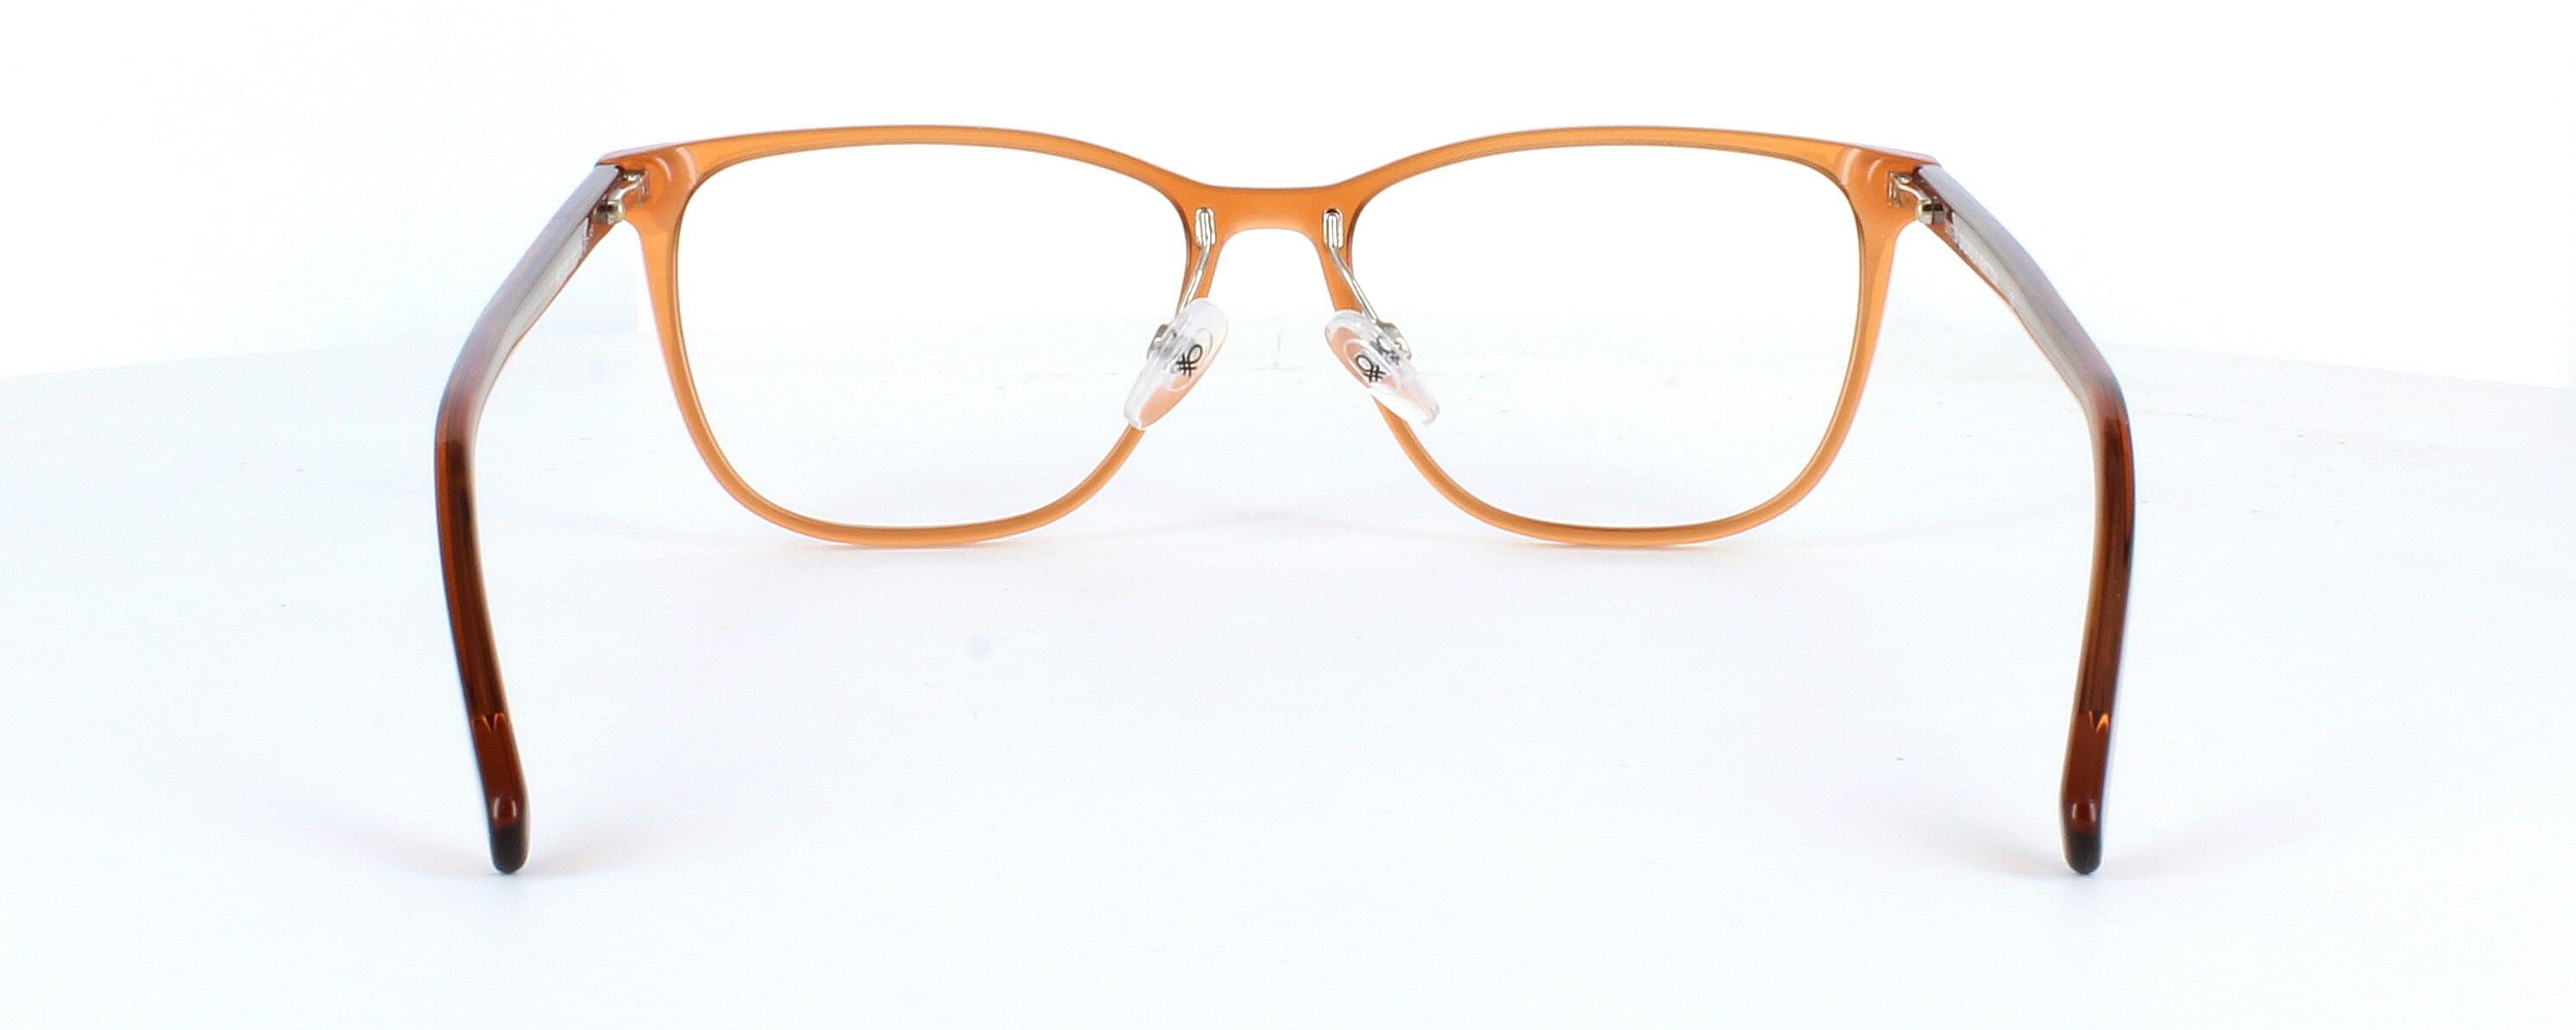 Benetton BEO1029 119 - Gent's crystal brown rectangular shaped glasses with sprung hinge temples - image view 4